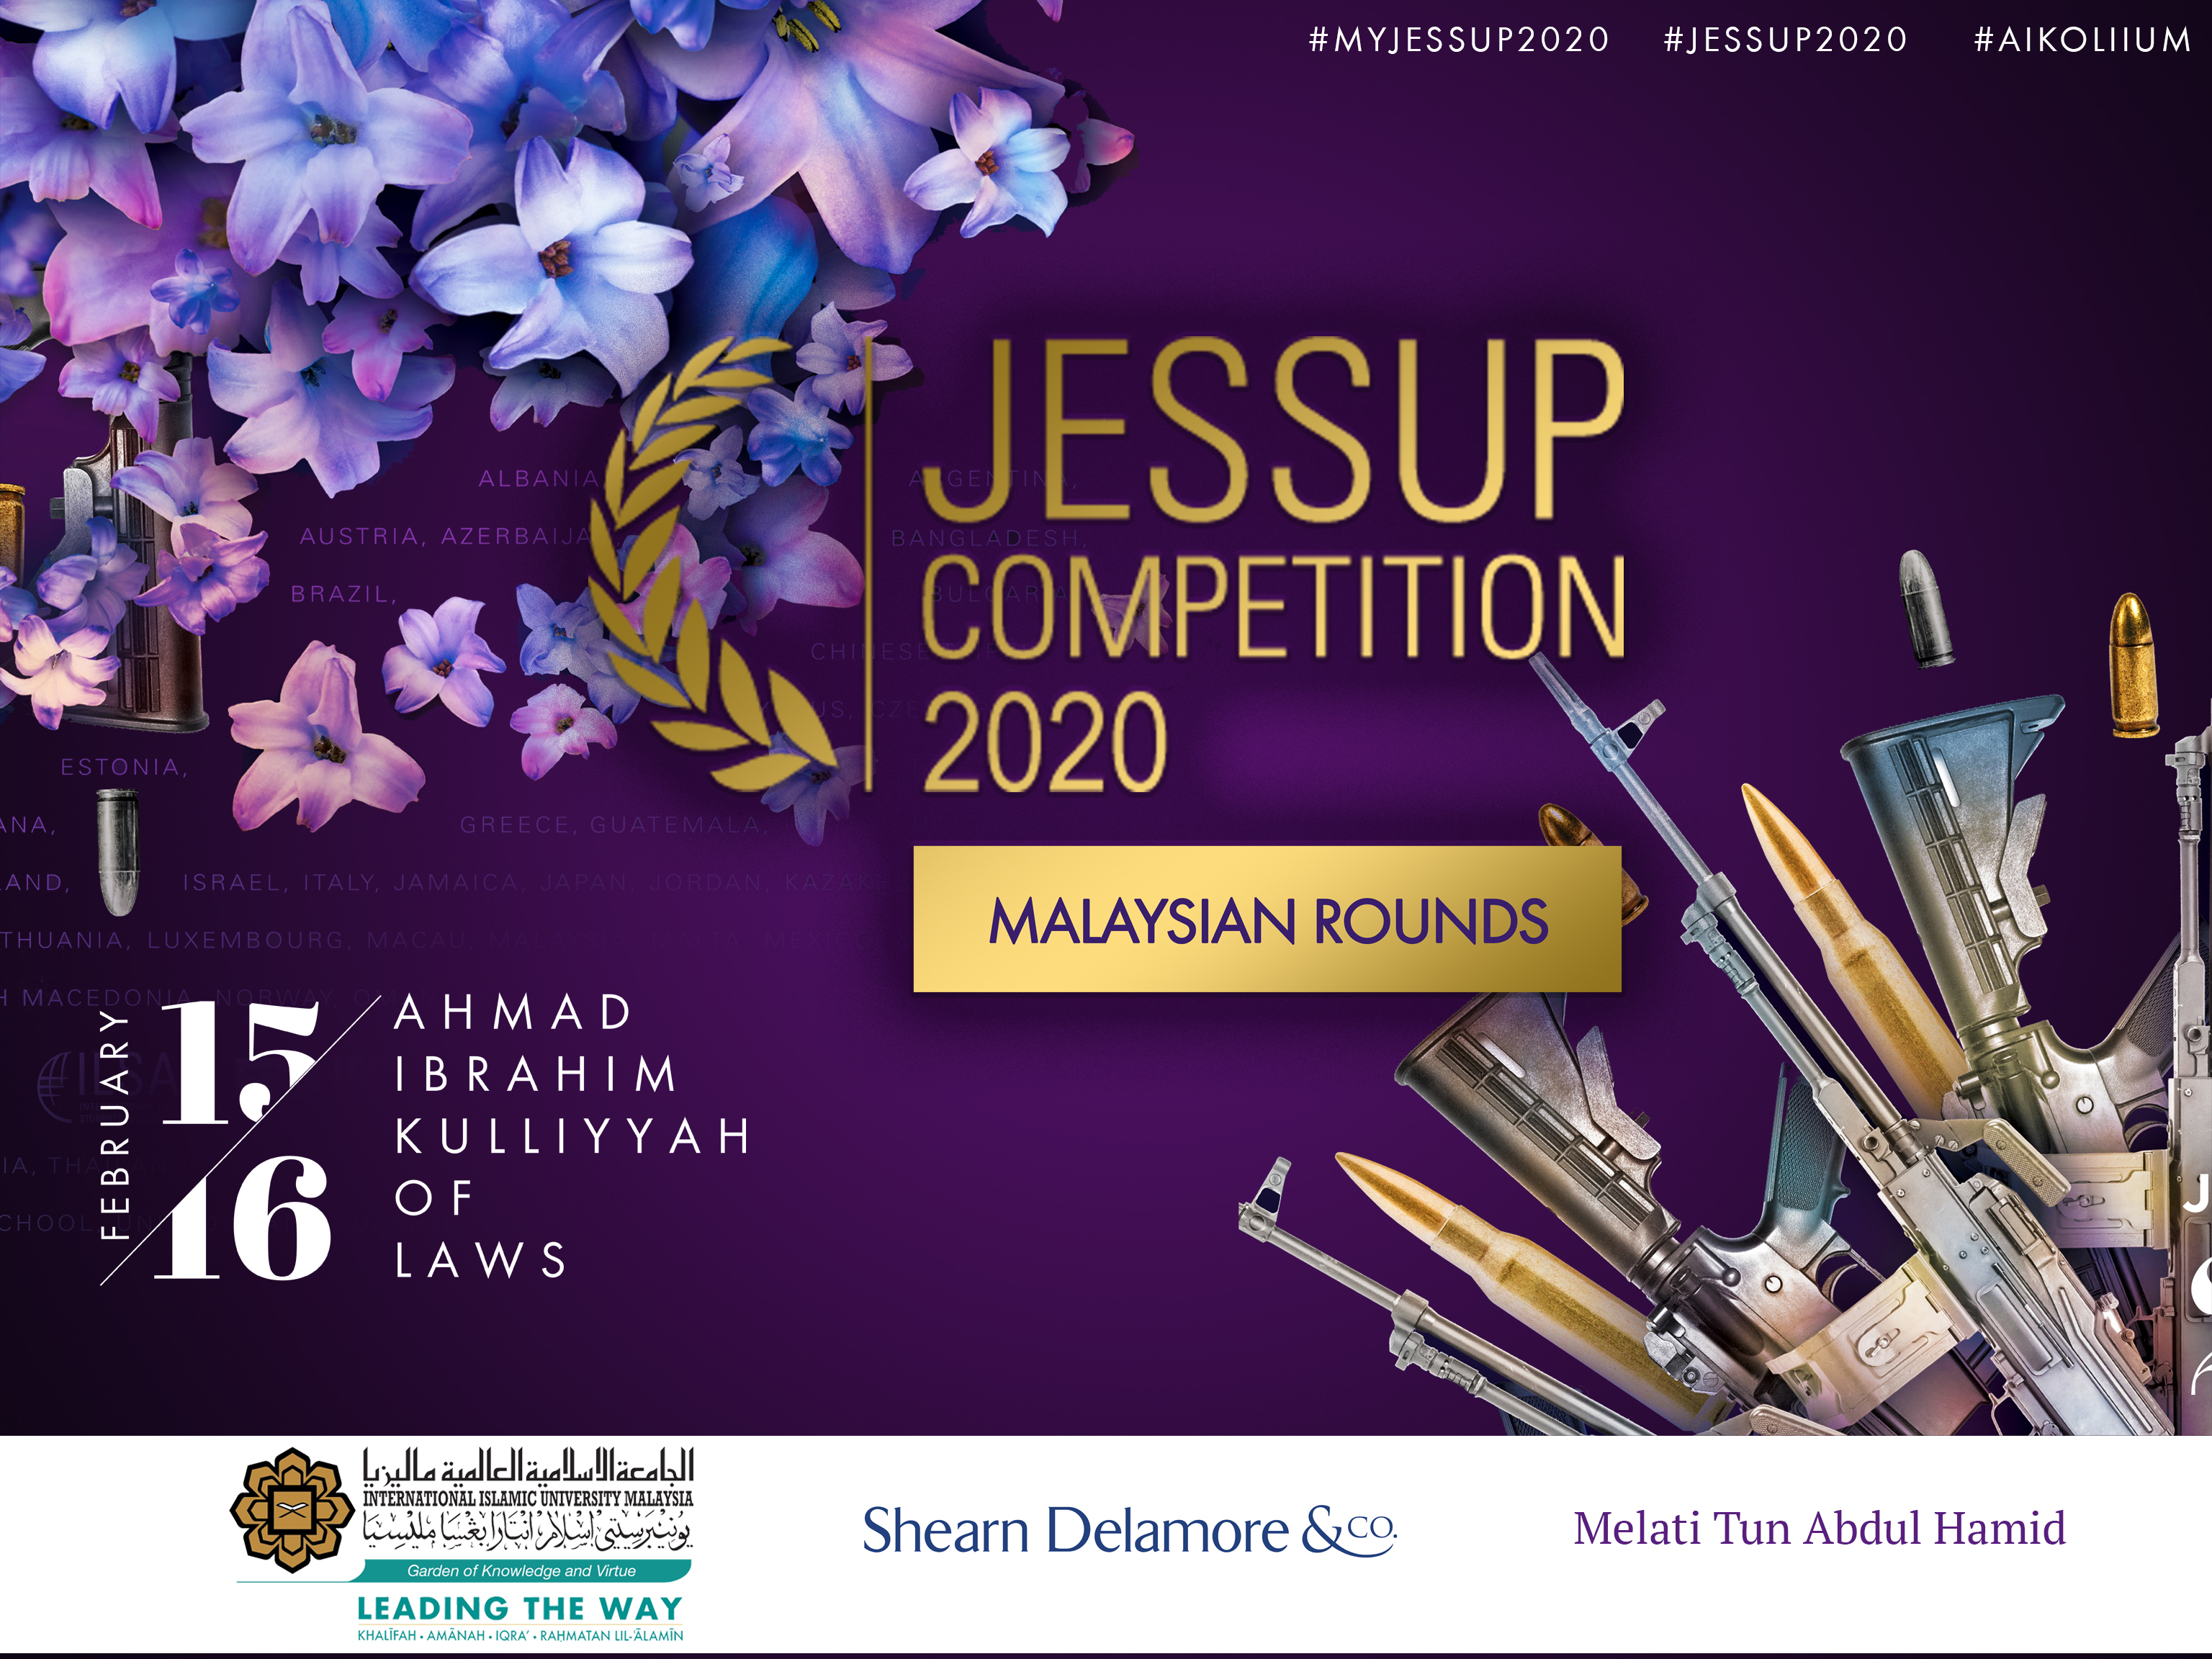 2020 JESSUP COMPETITION 2020